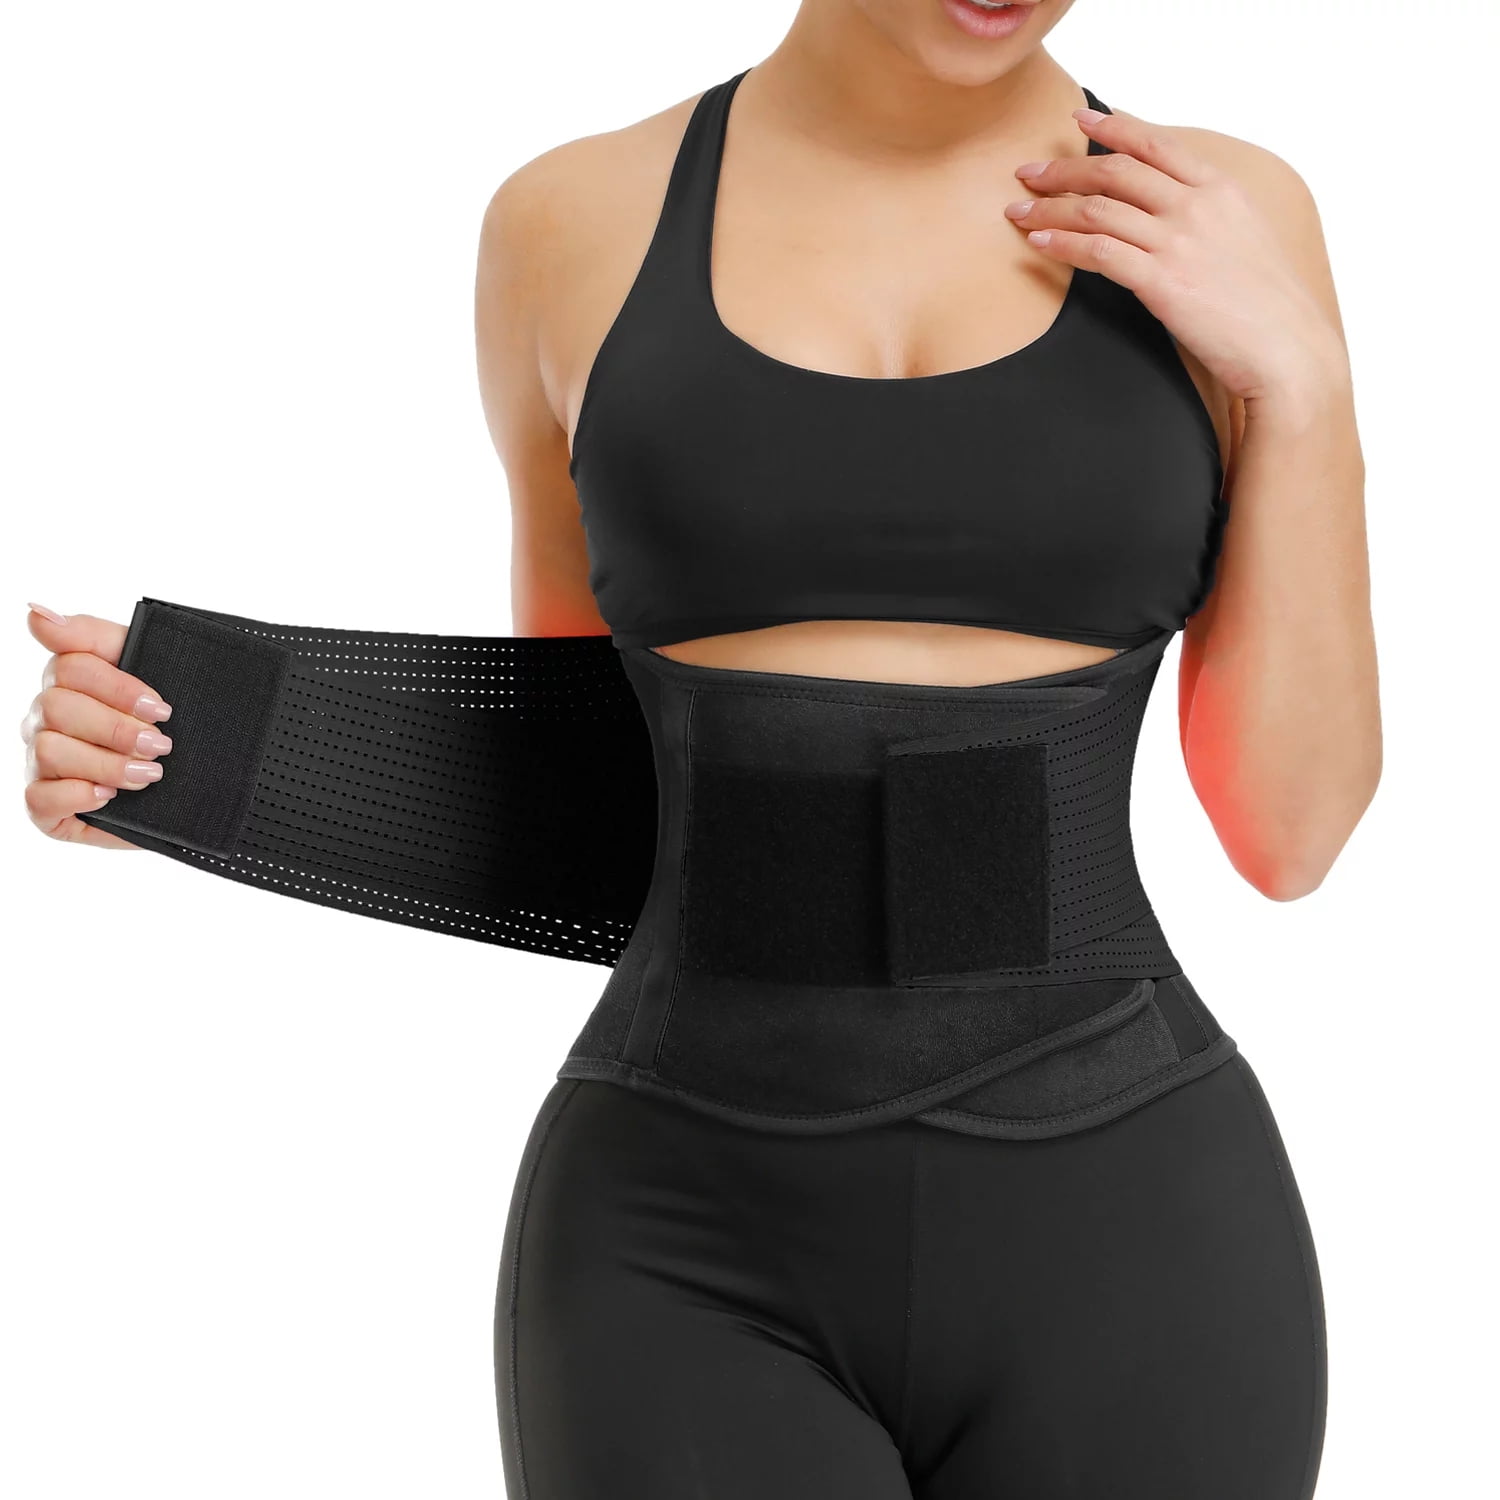 Lilvigor Men Waist Trainer Corsets Weight Loss Tummy Control Compression  Shapewear Sport Workout Girdle Slimming Body Shaper 